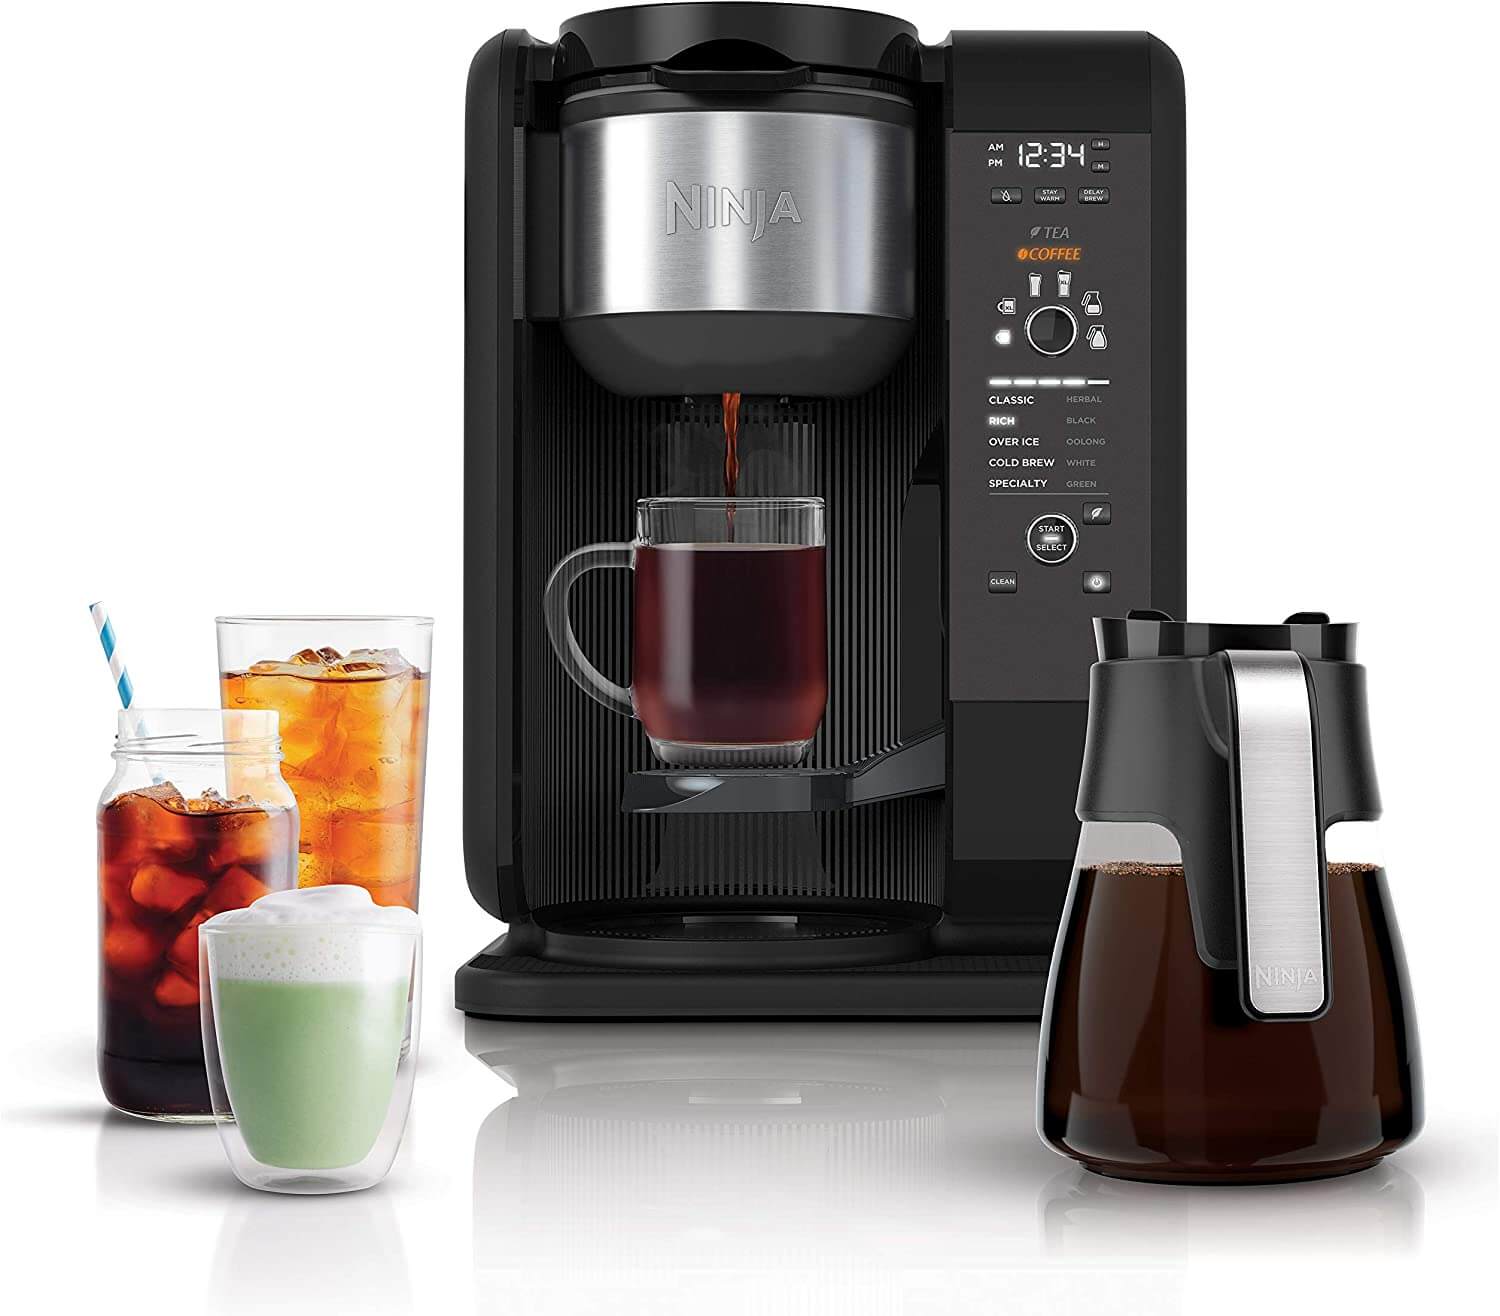 Ninja Hot and Cold Brewed System, Auto-iQ Tea and Coffee Maker with 6 Brew Sizes